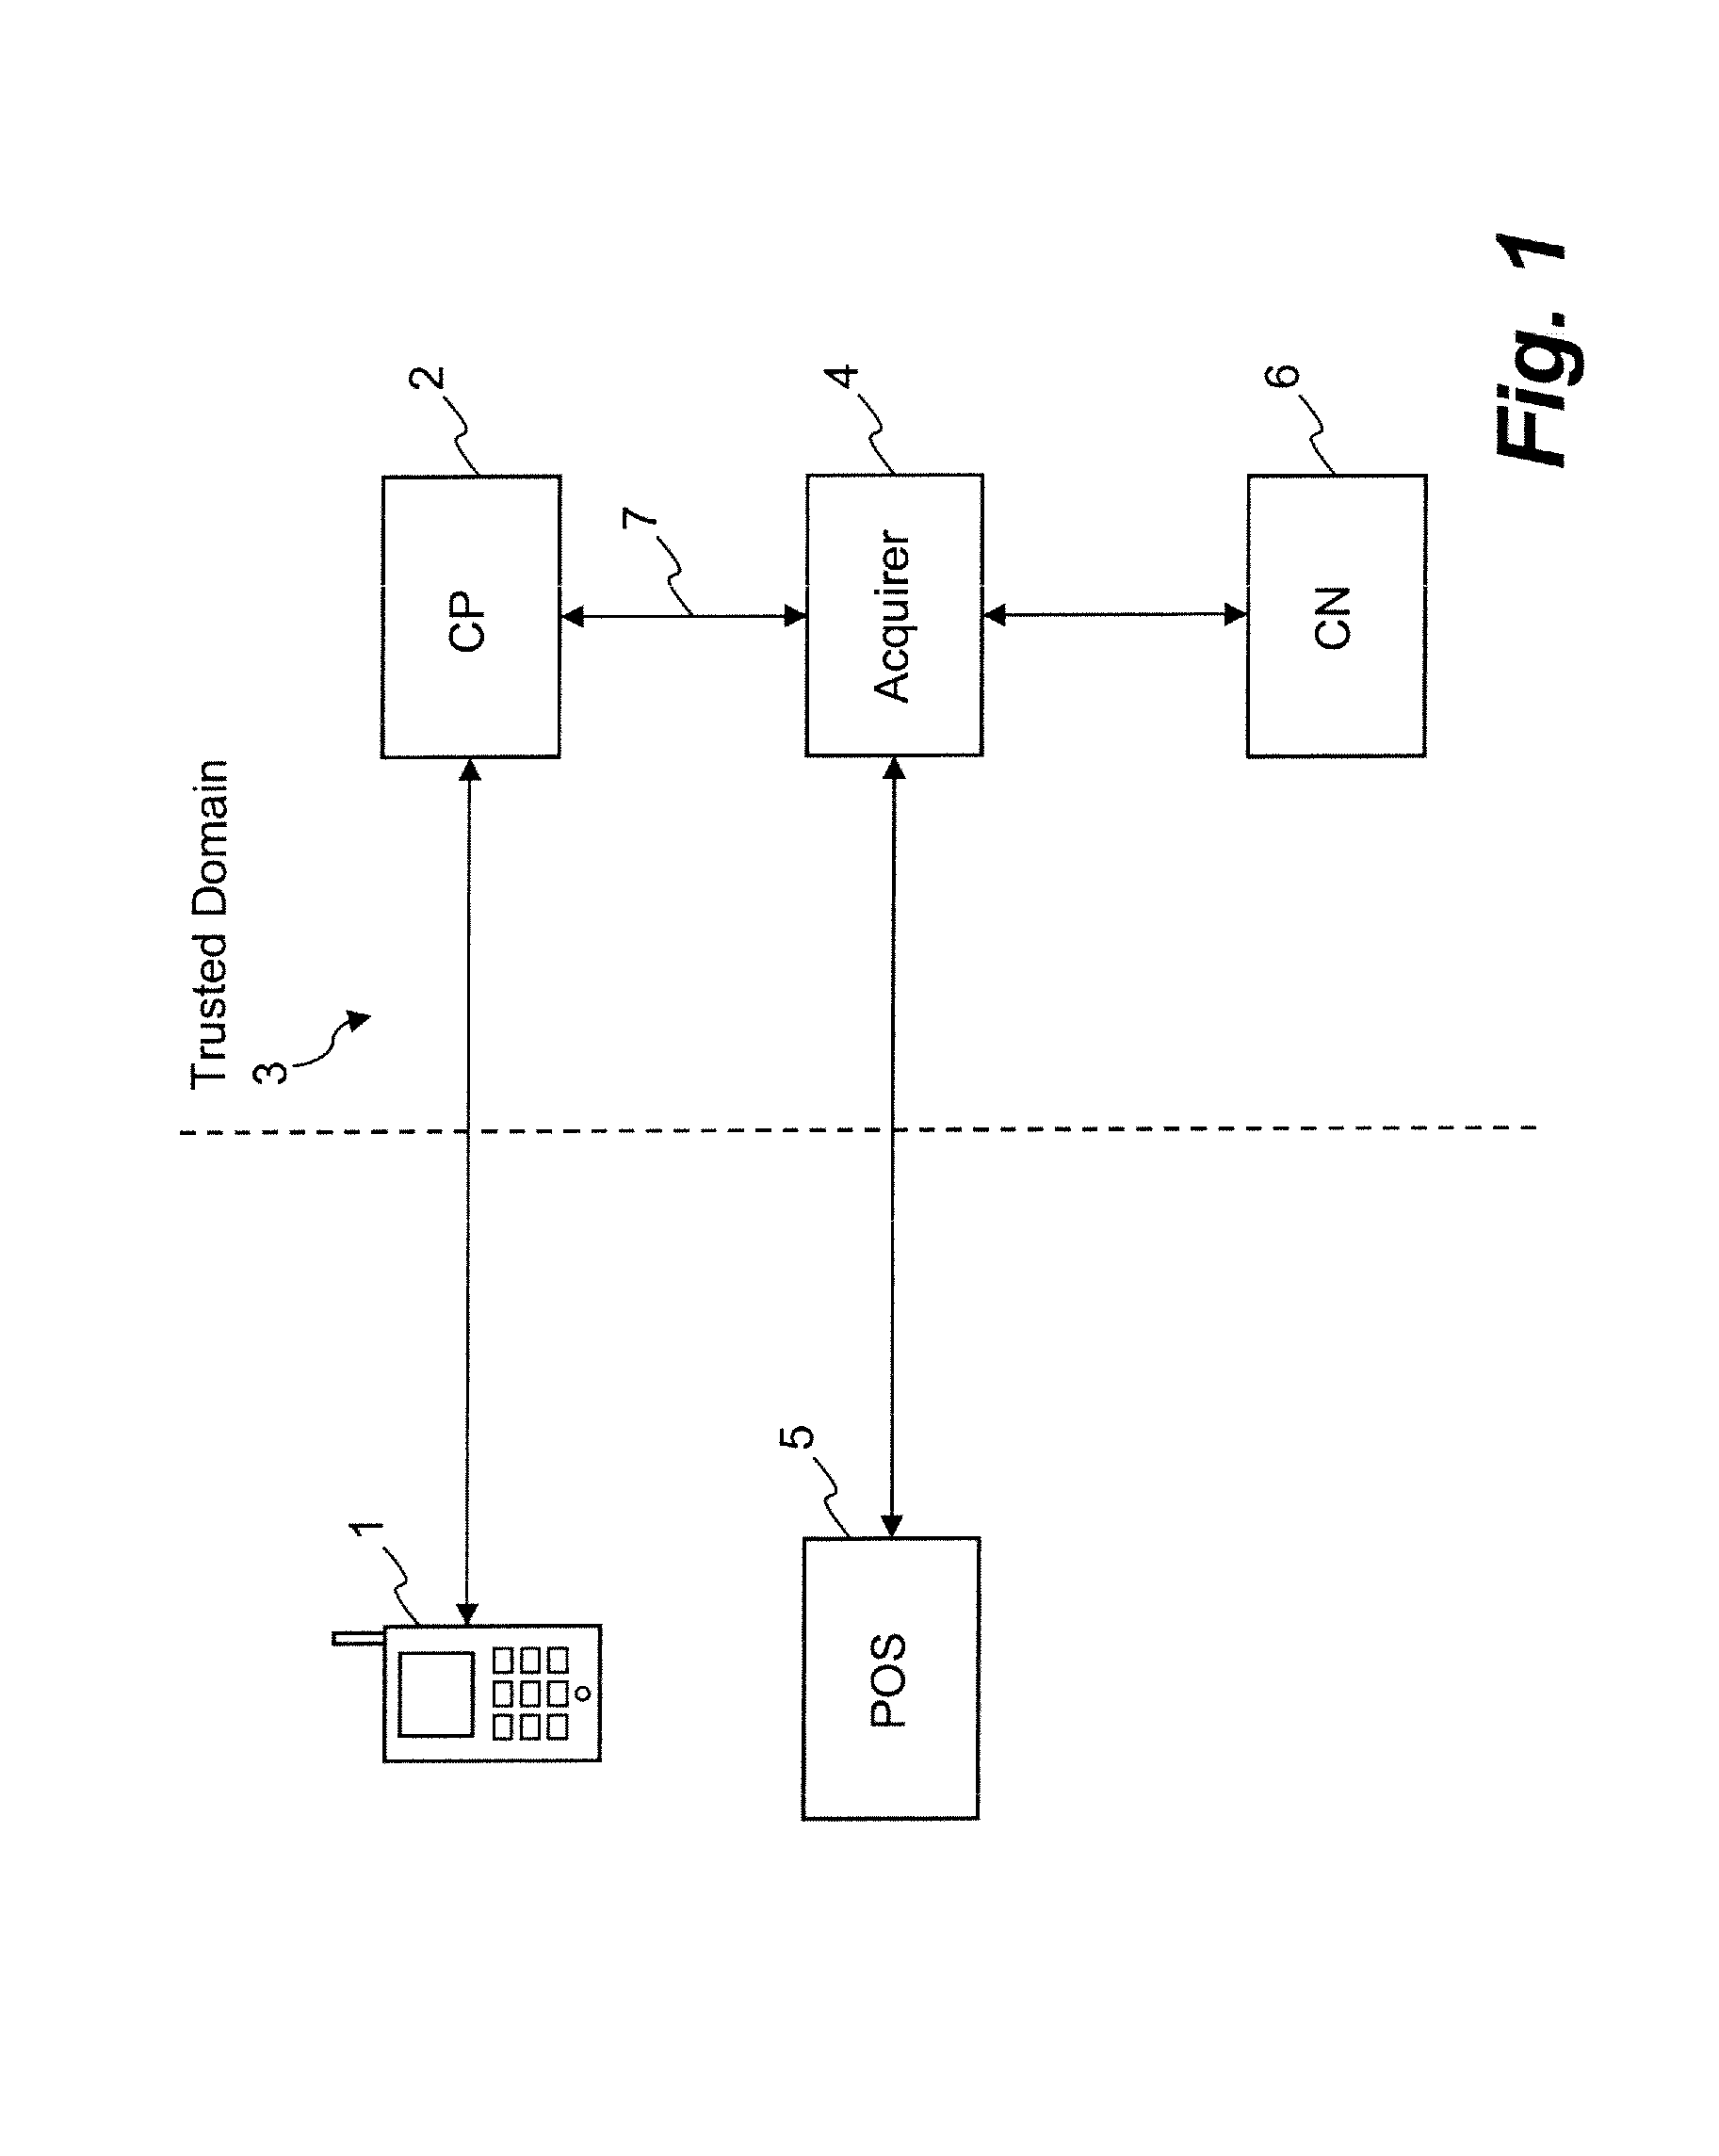 Method and apparatus for performing a credit based transaction between a user of a wireless communications device and a provider of a product or service